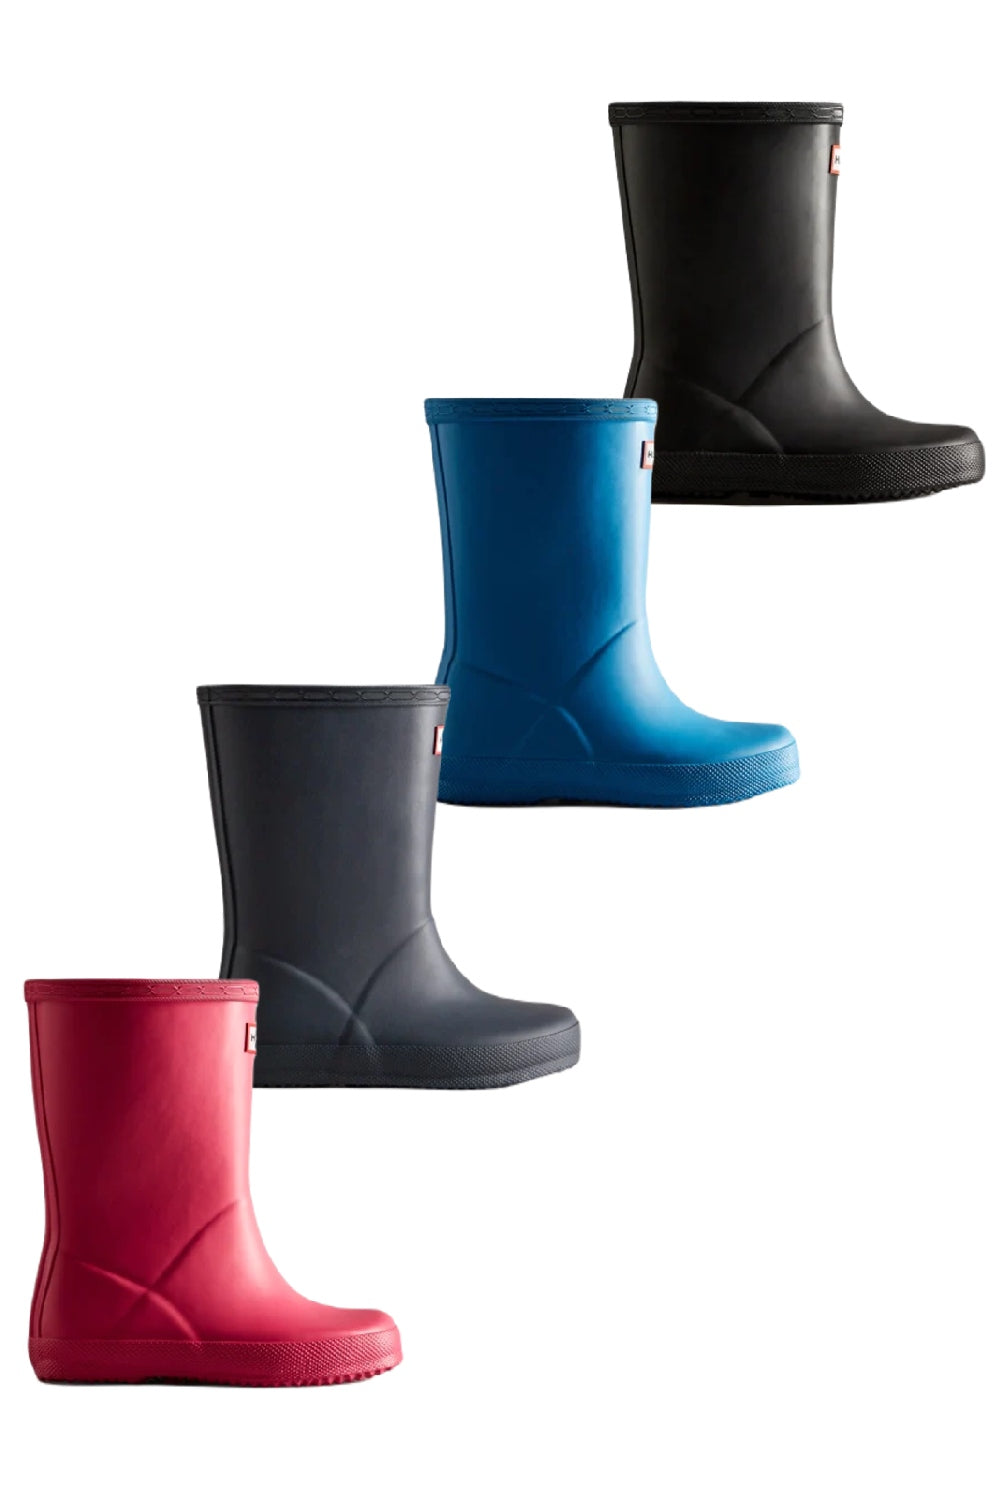 Hunter Kids First Classic Wellington Boots in Black, Bright Pink, Navy and Poolhouse Blue